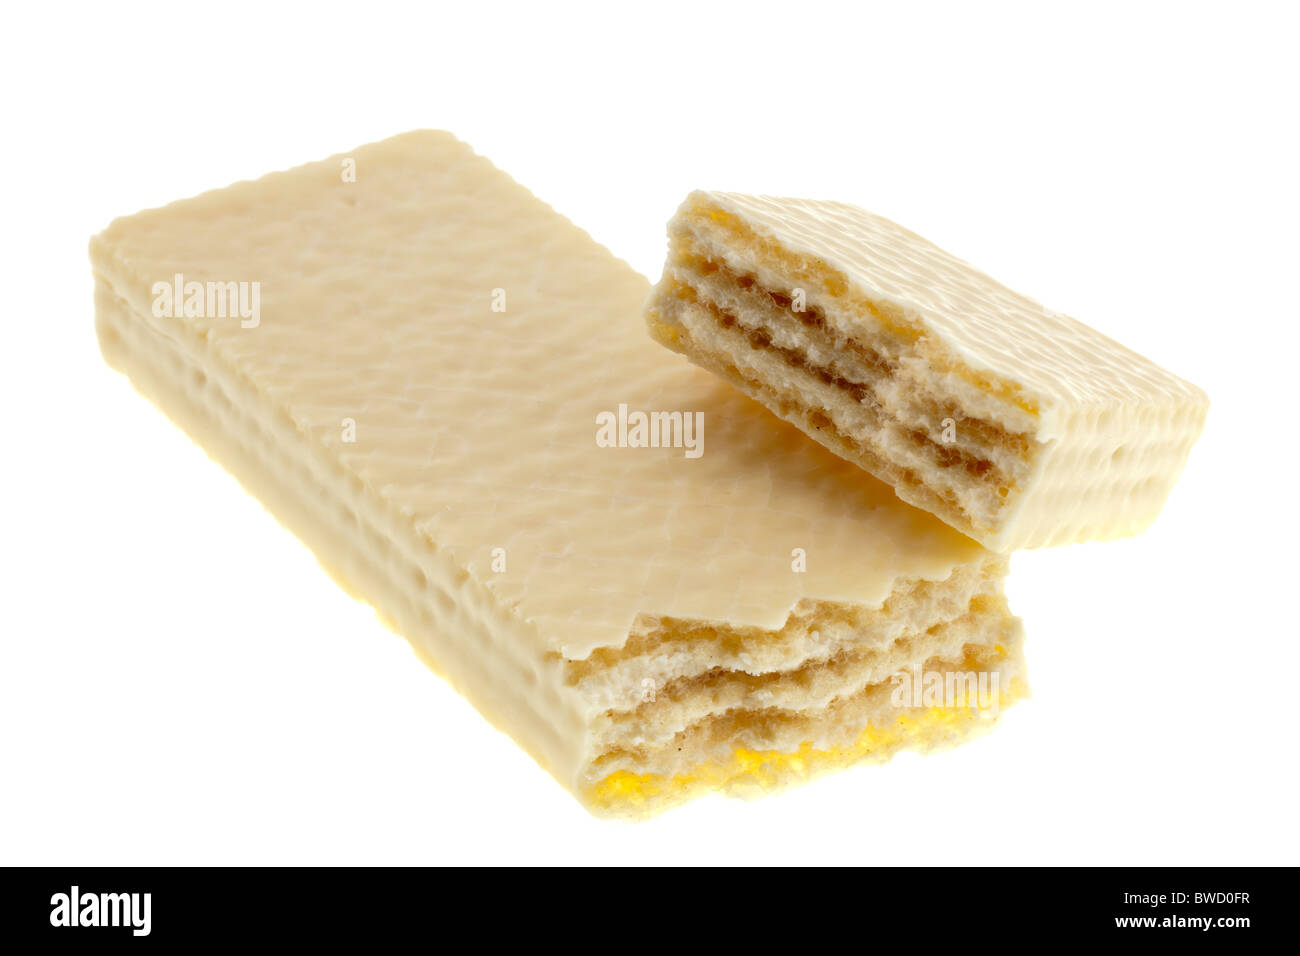 Wafer bar covered in White chocolate Stock Photo